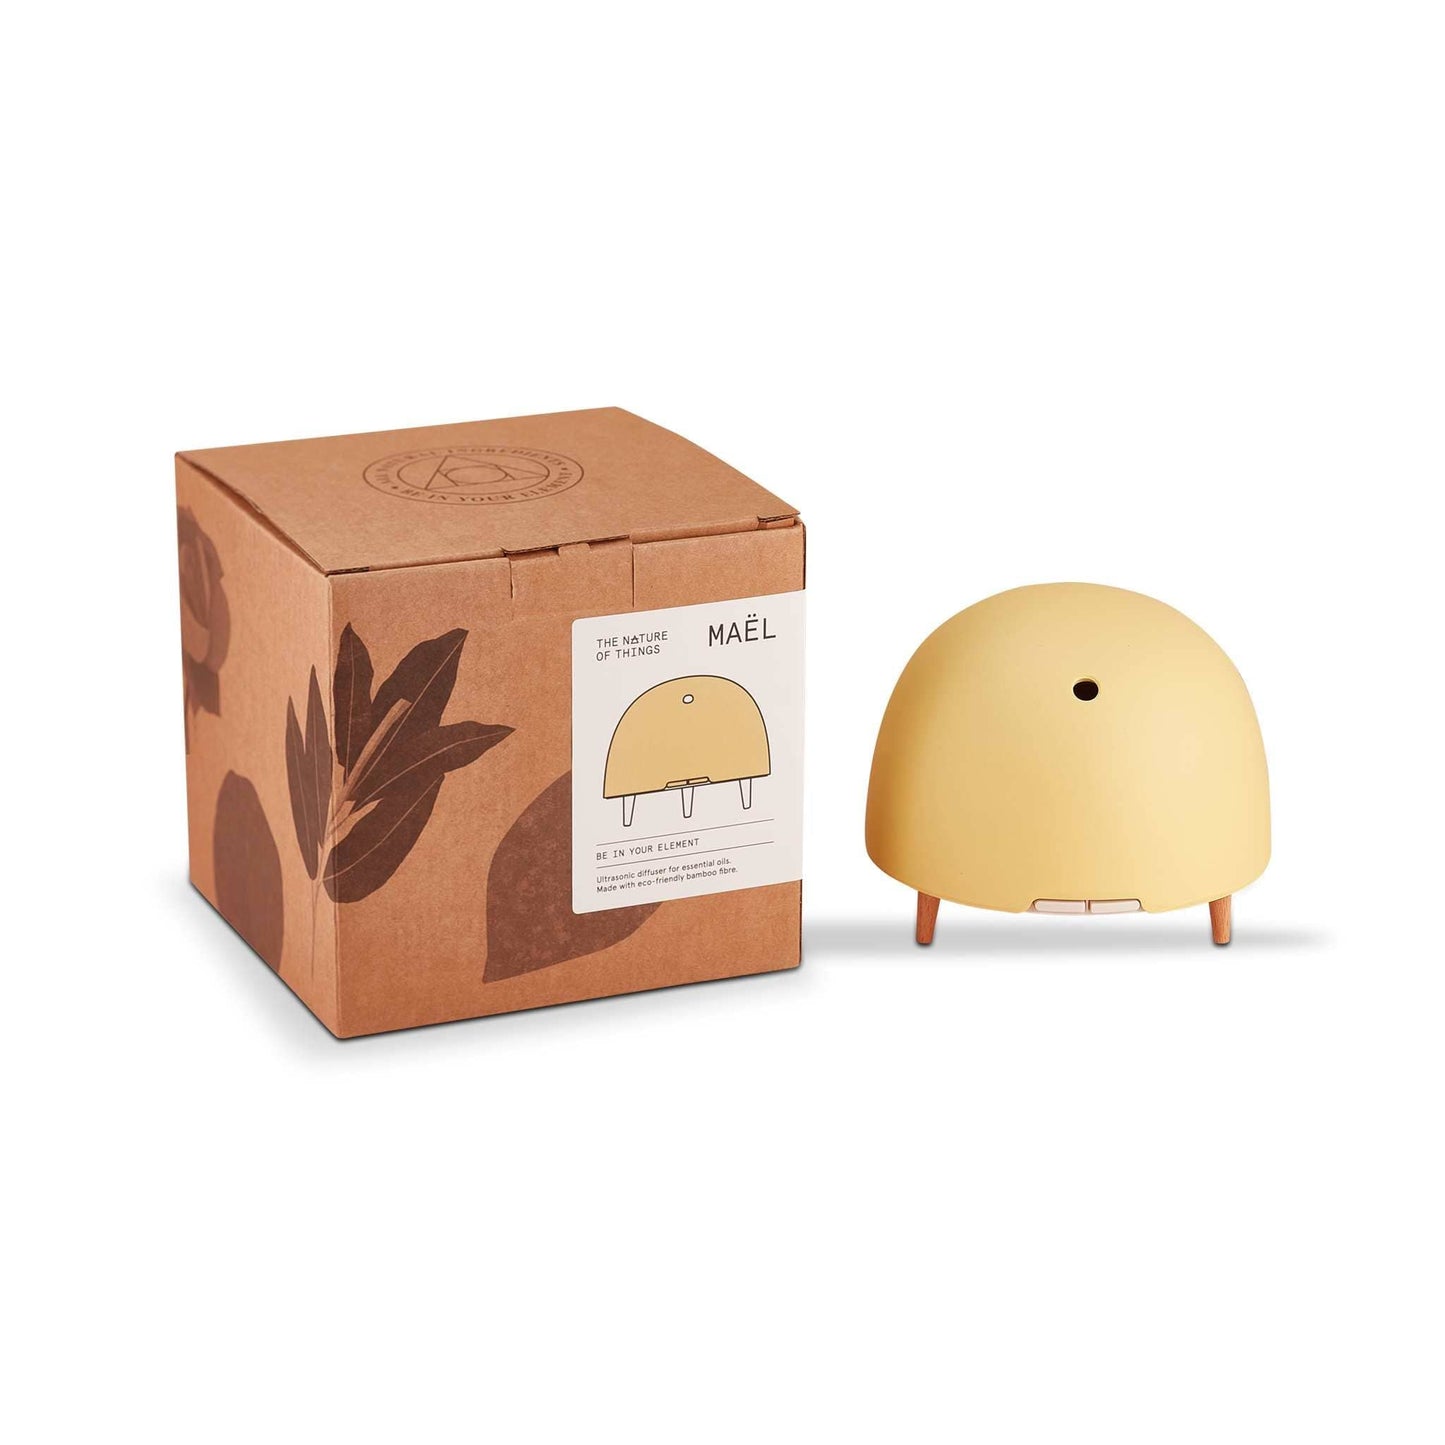 The Nature of Things Essential Oil Essential Oil Diffuser - Maël - Sand - The Nature of Things